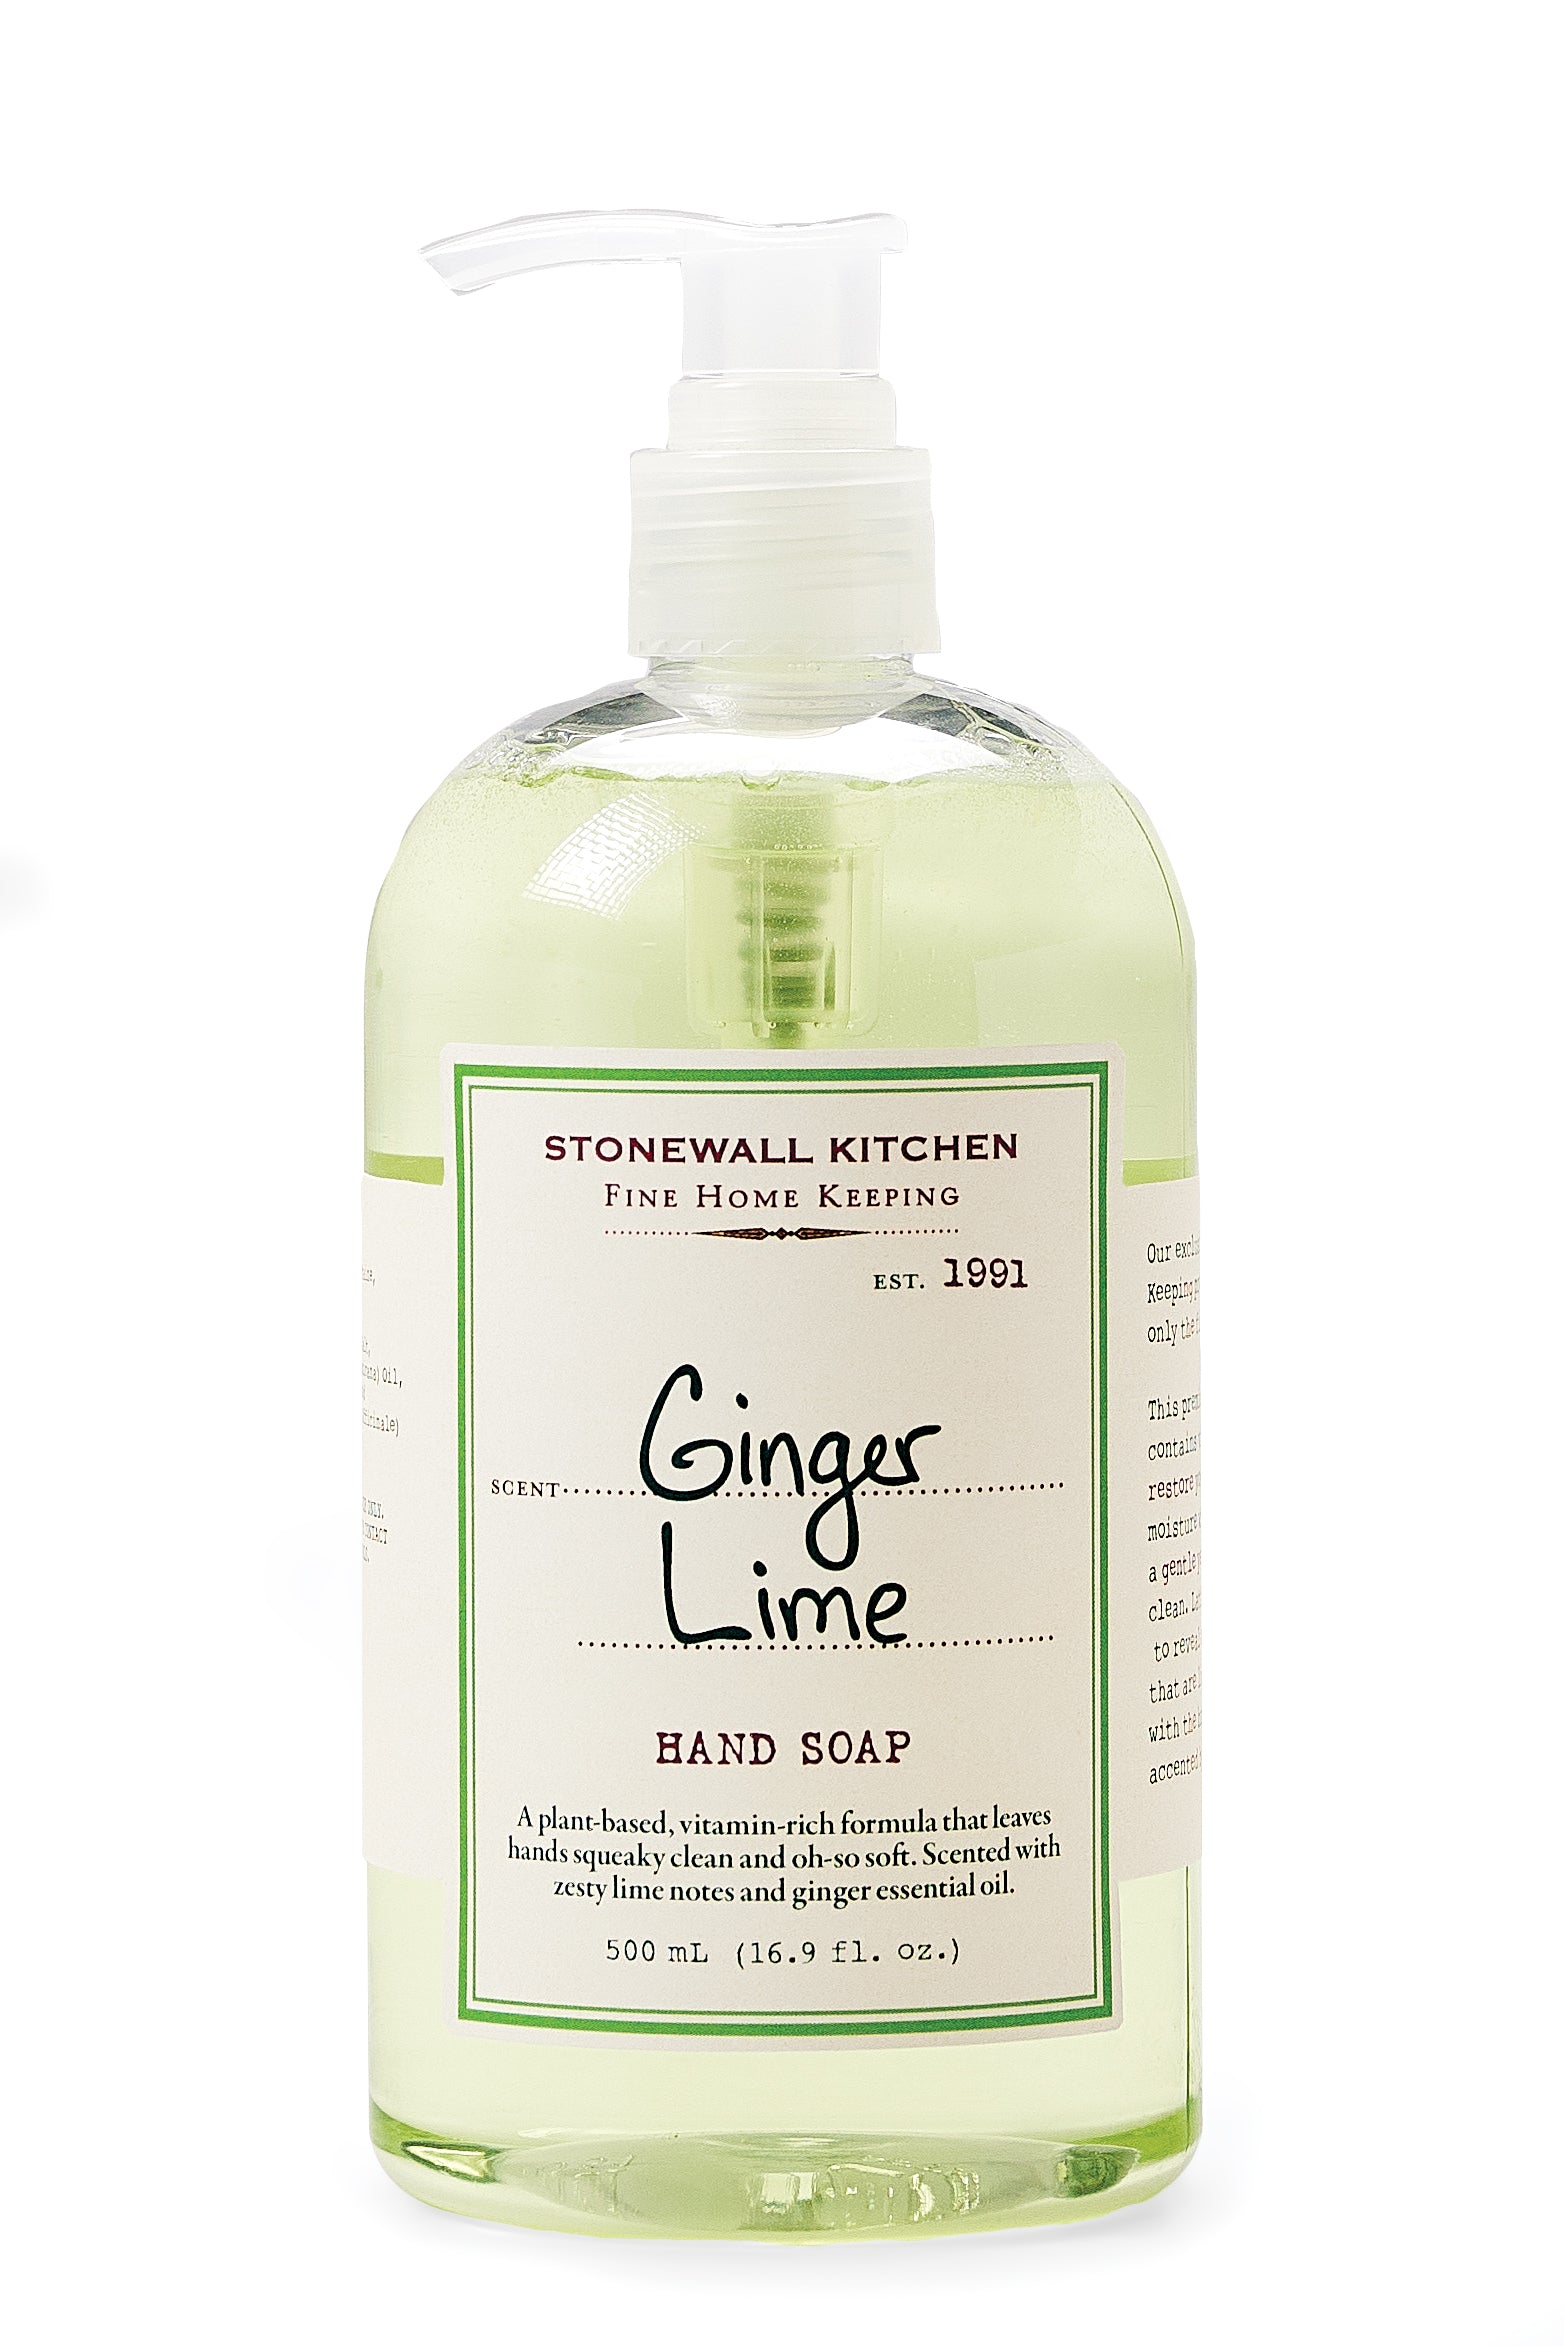 Stonewall Kitchen Hand Soap - Olive Oil Etcetera 